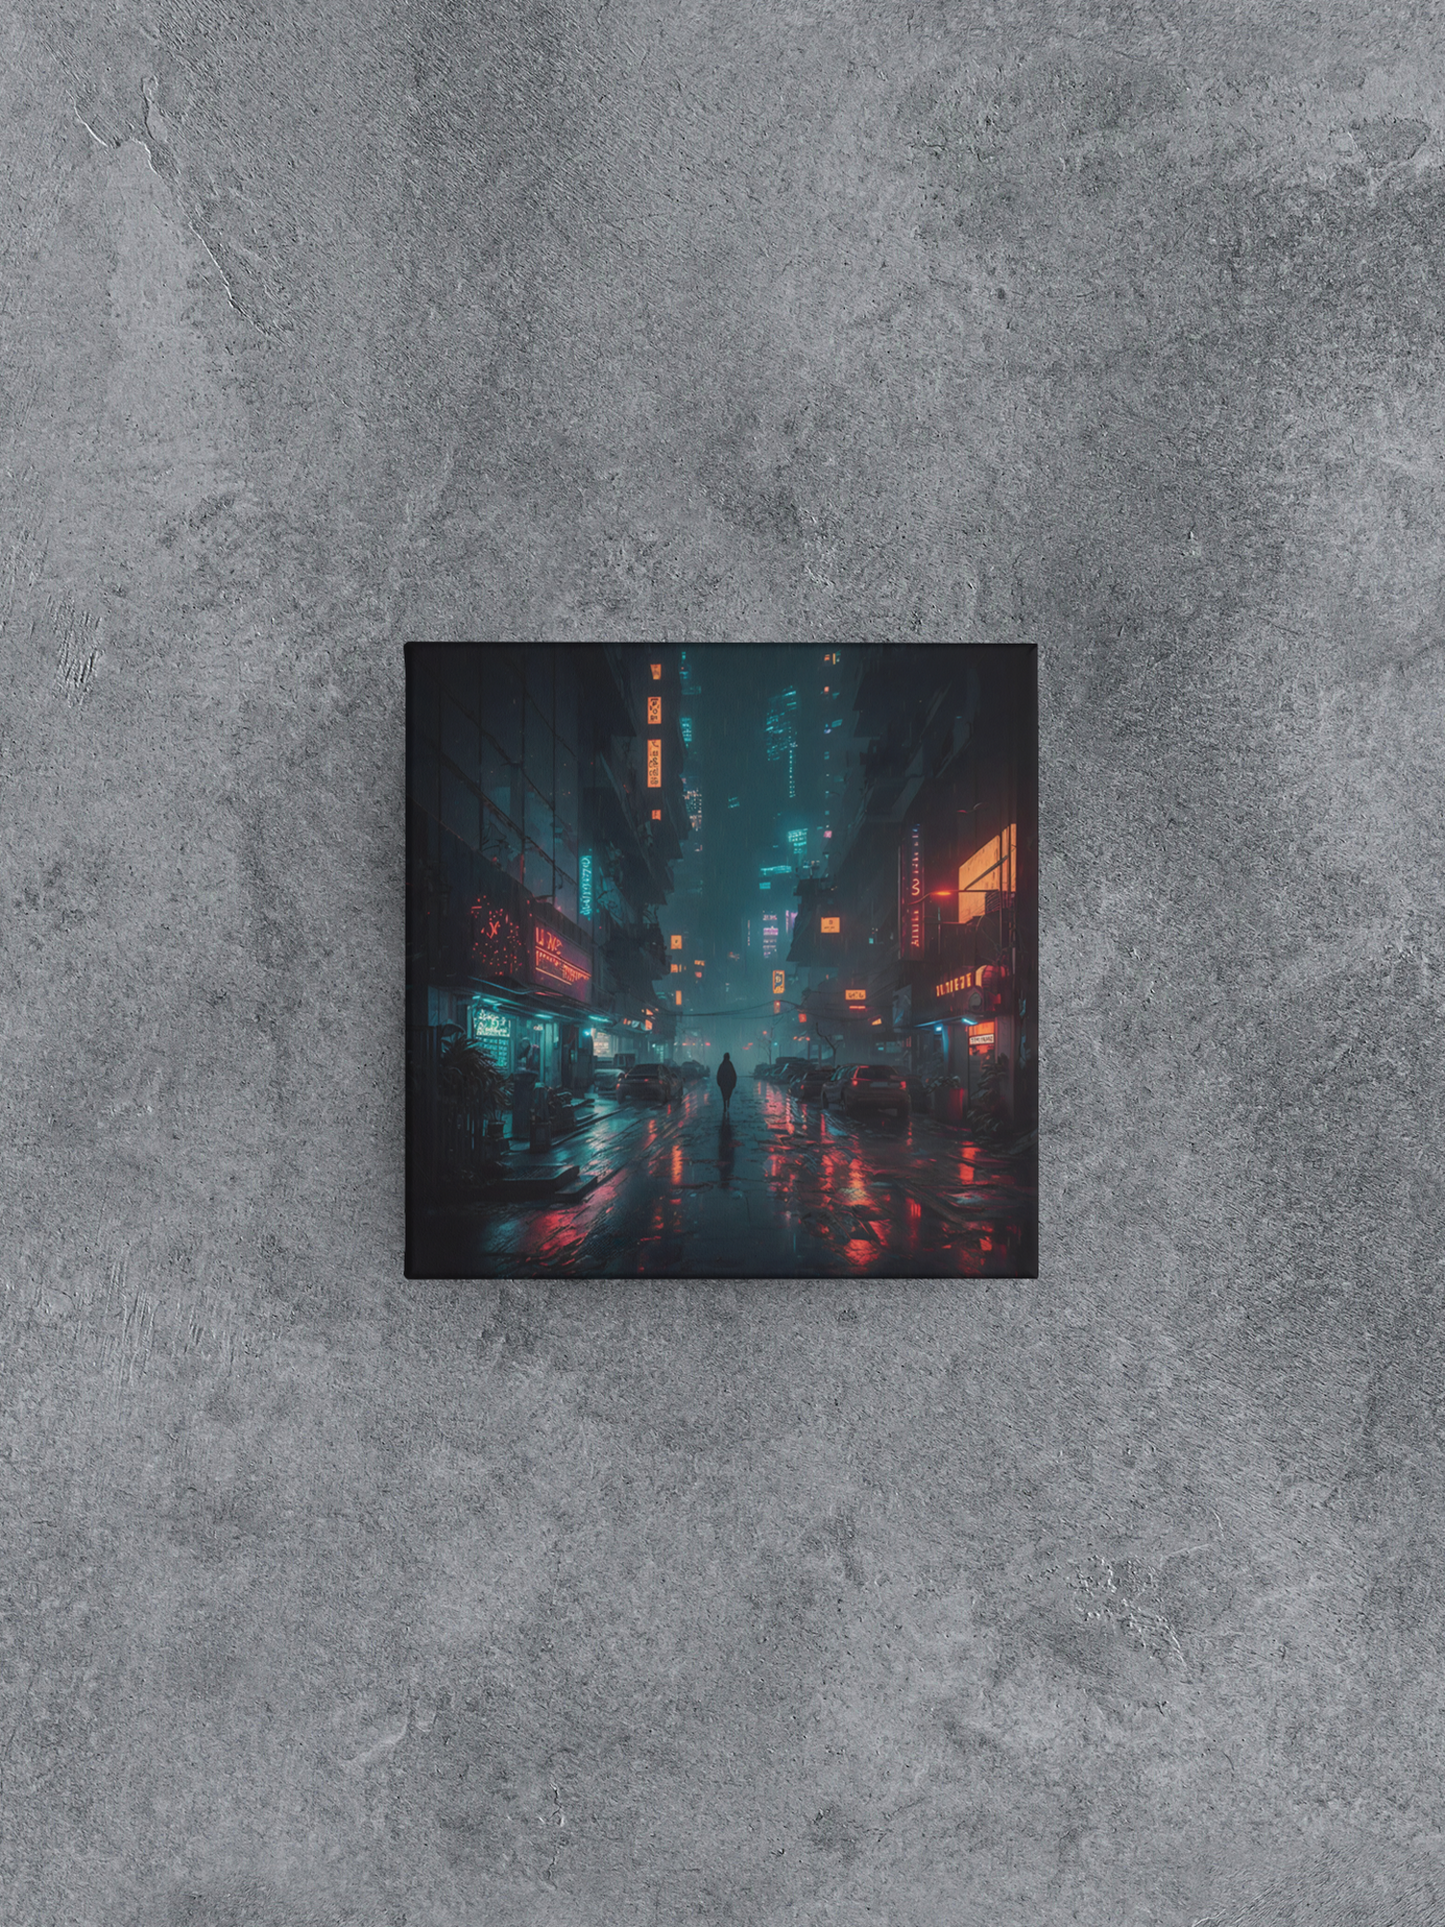 Cyberpunk City Street at Night Canvas Wall Art, Lone Person on Cyberpunk City Street, Cyberpunk Commercial District with Neon Vendor Signs